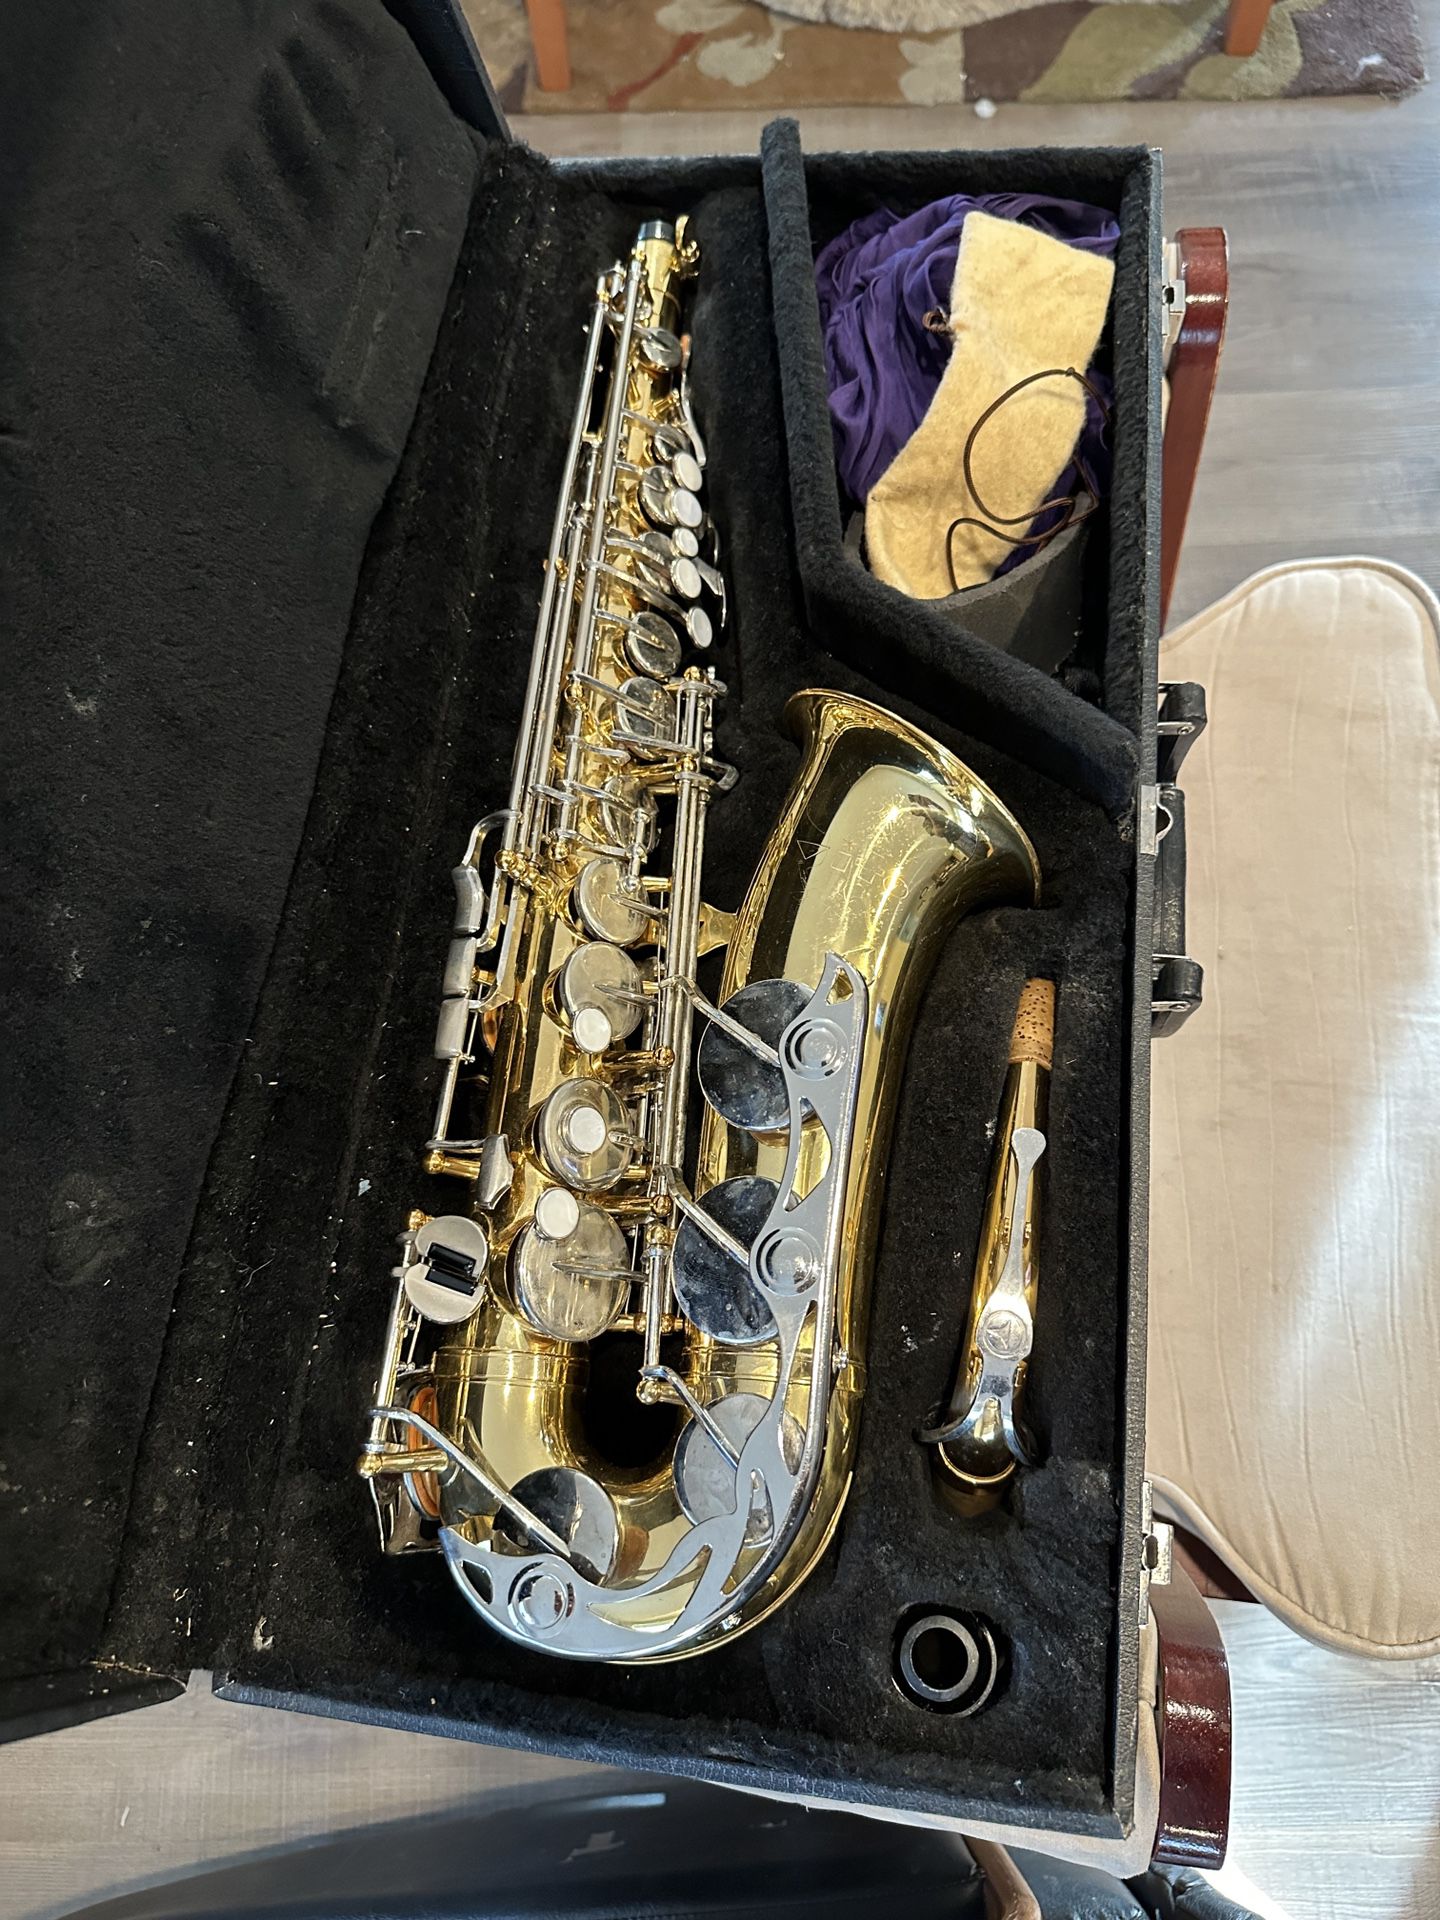 Alto Saxophone - Used, normal wear. $450 or best offer